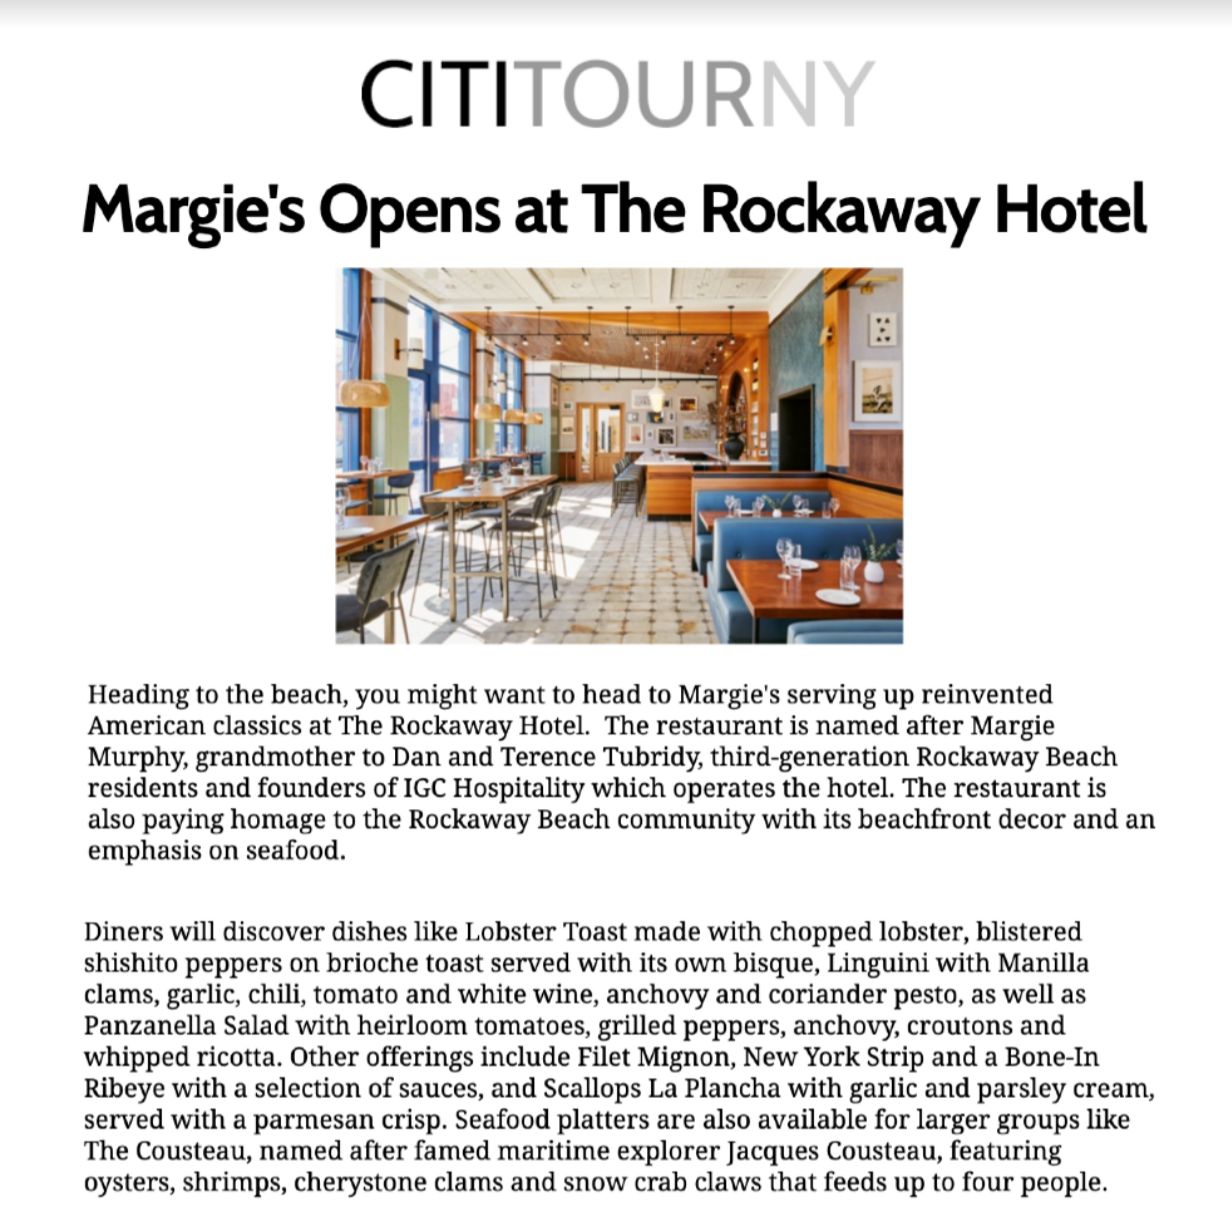 Article about The Rockaway Hotel in Cititourny by Cititour.com